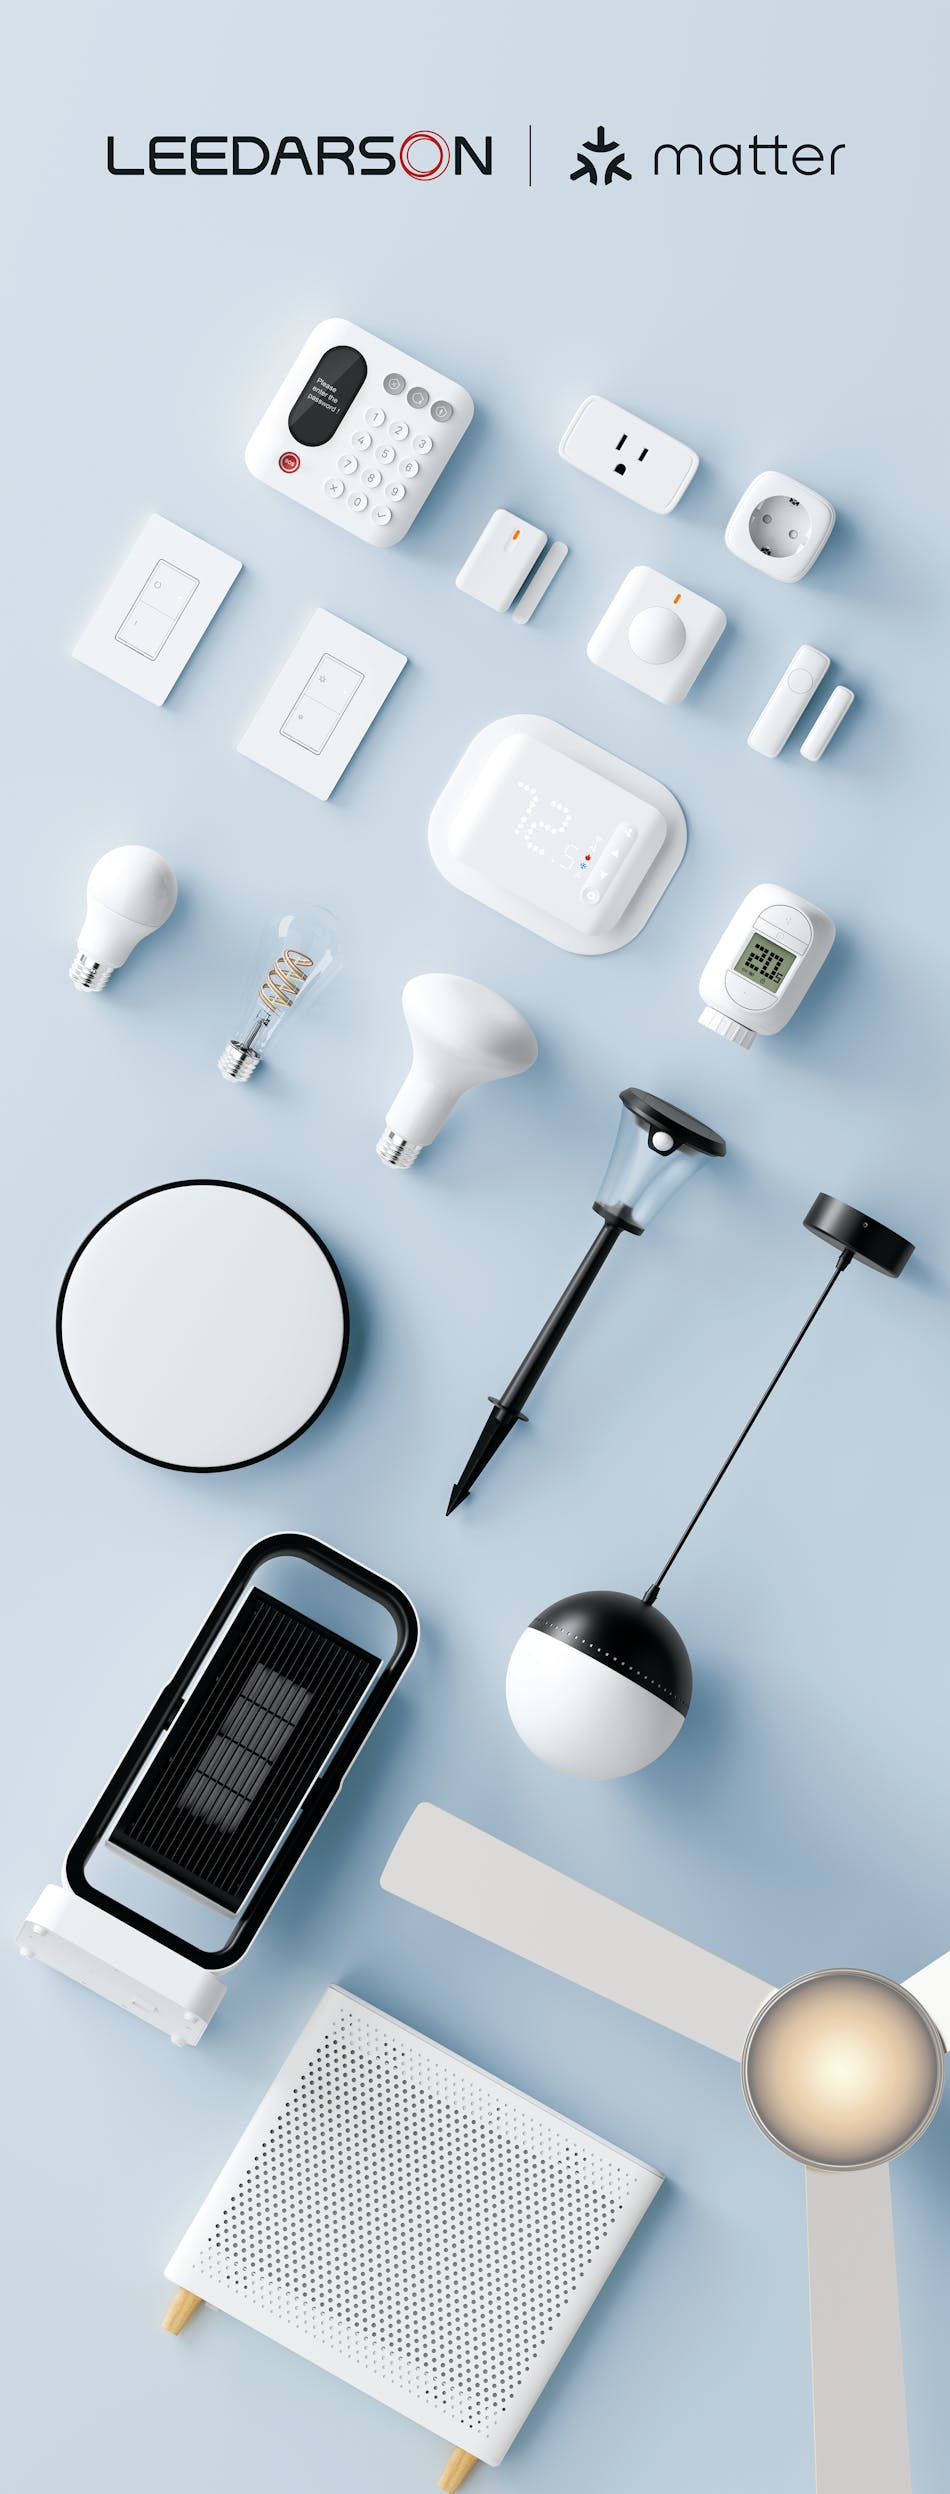 IoT lighting from Leedarson IoT Technology Inc. will be featured in the connected lighting zone.